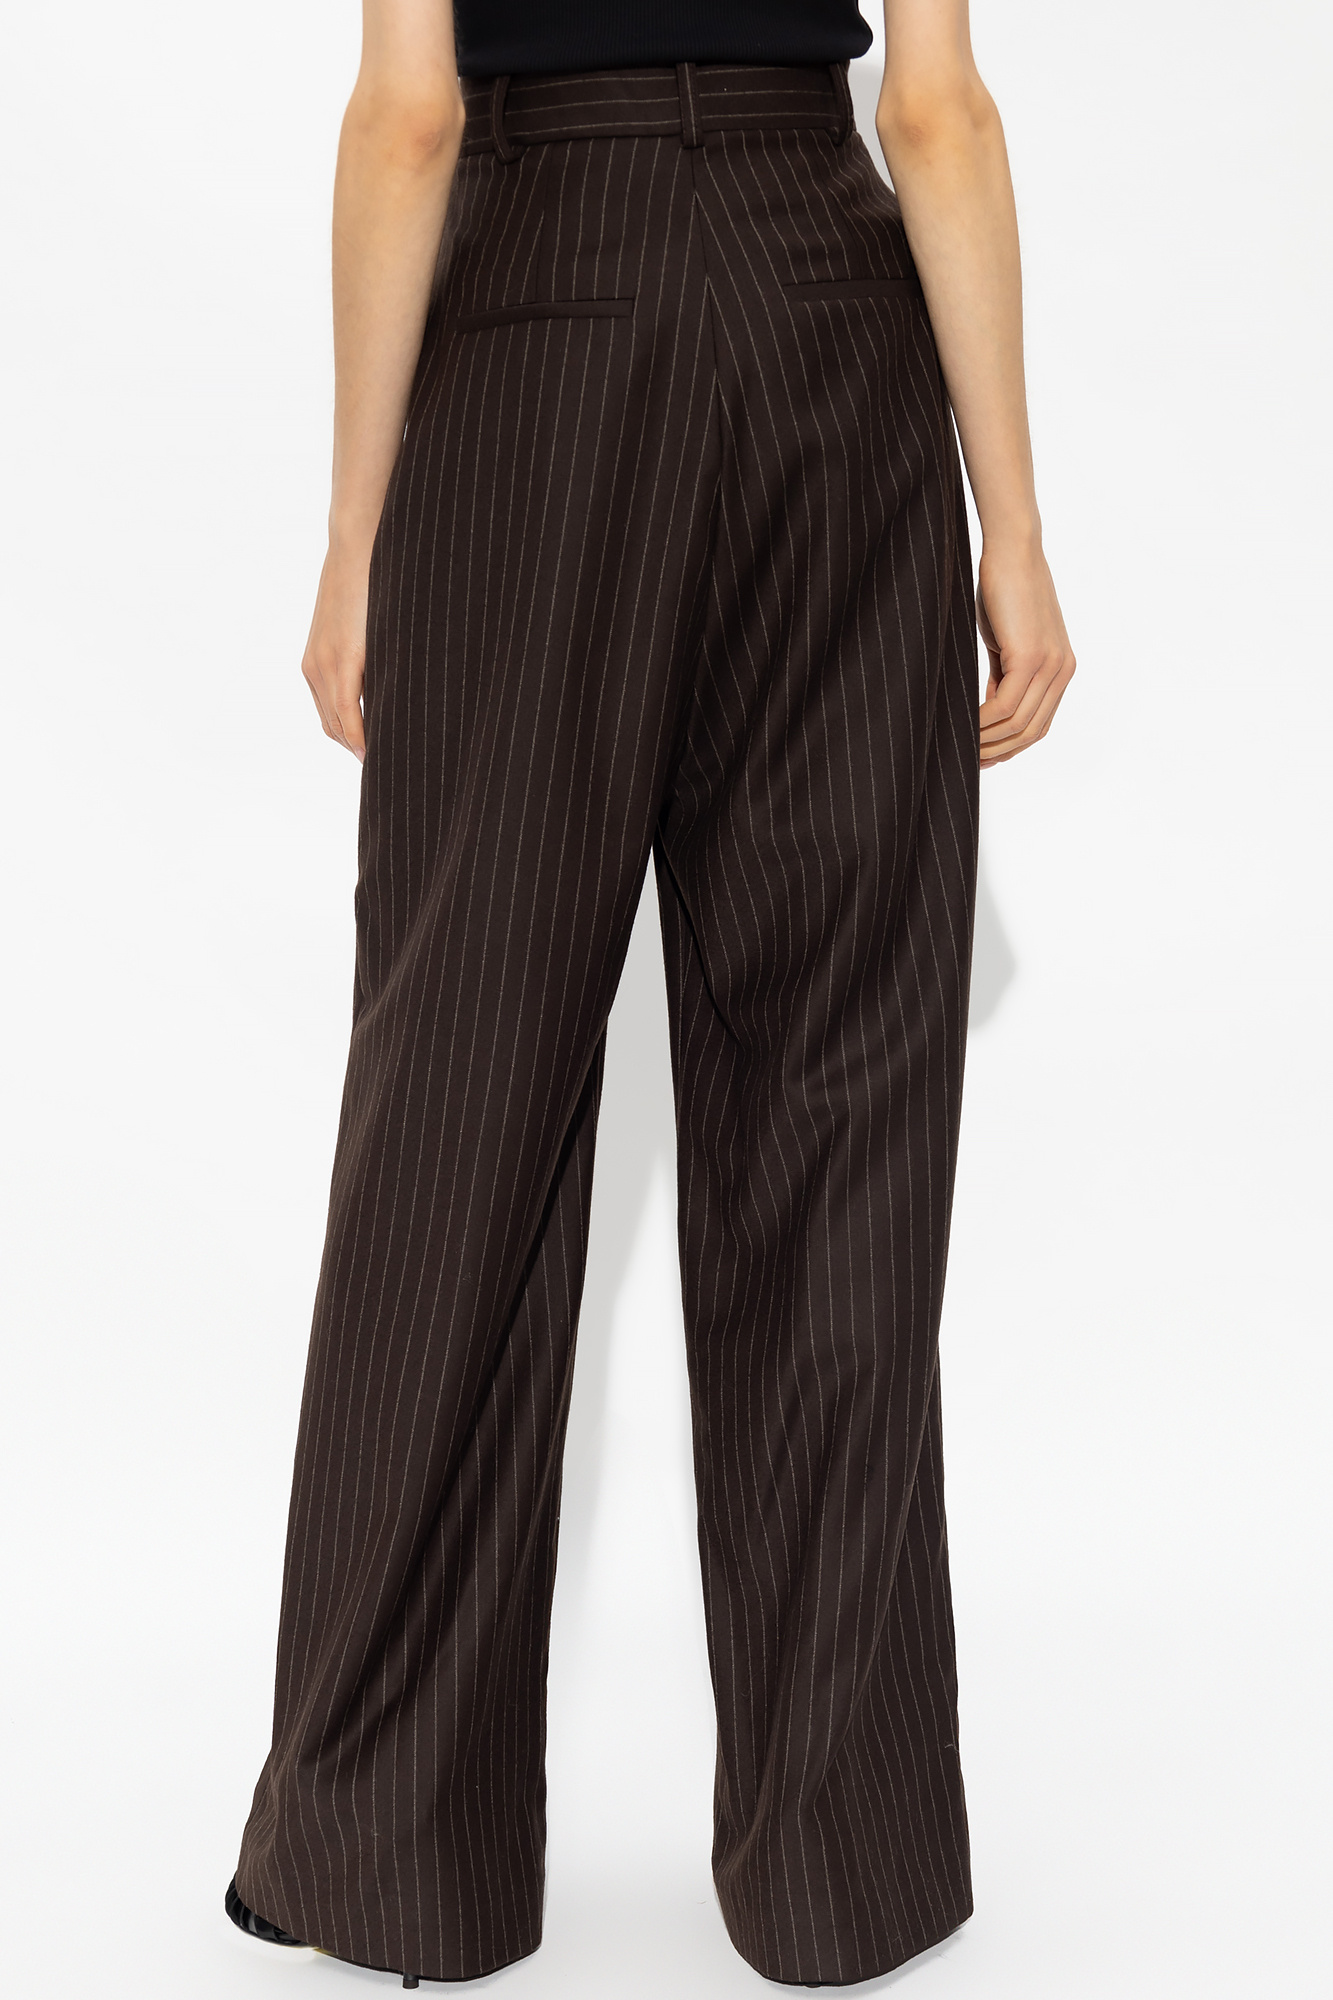 The Mannei ‘Jafr’ pleat-front black trousers